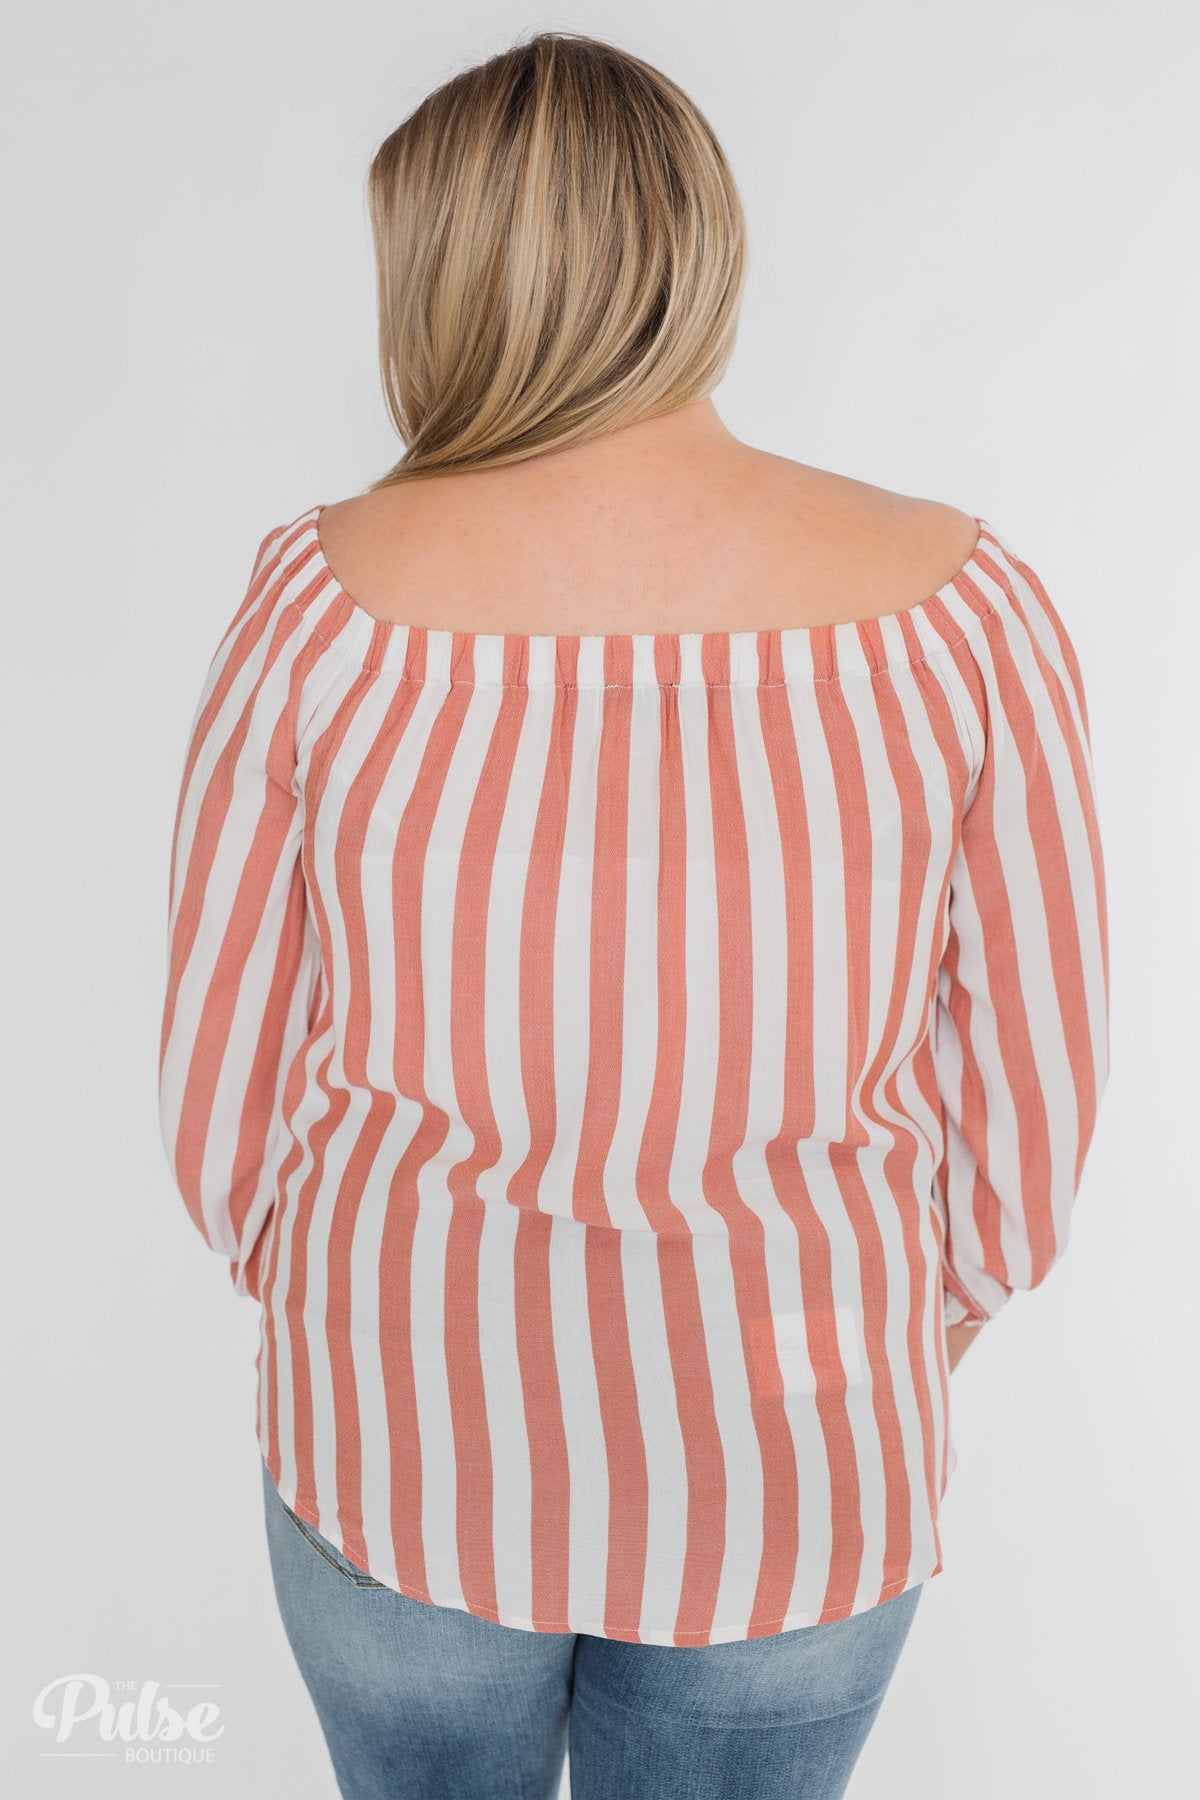 Warmer Weather Off The Shoulder Striped Top- Light Salmon